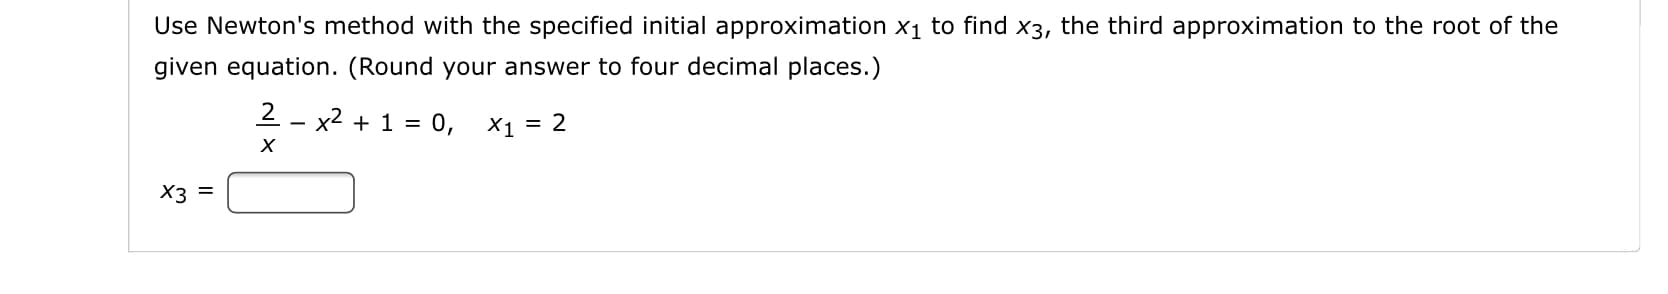 Use Newton's method with the specified initial approximation x1 to find x3, the third approximation to the root of the
given equation. (Round your answer to four decimal places.)
2 - x2 + 1 = 0,
X1 = 2
